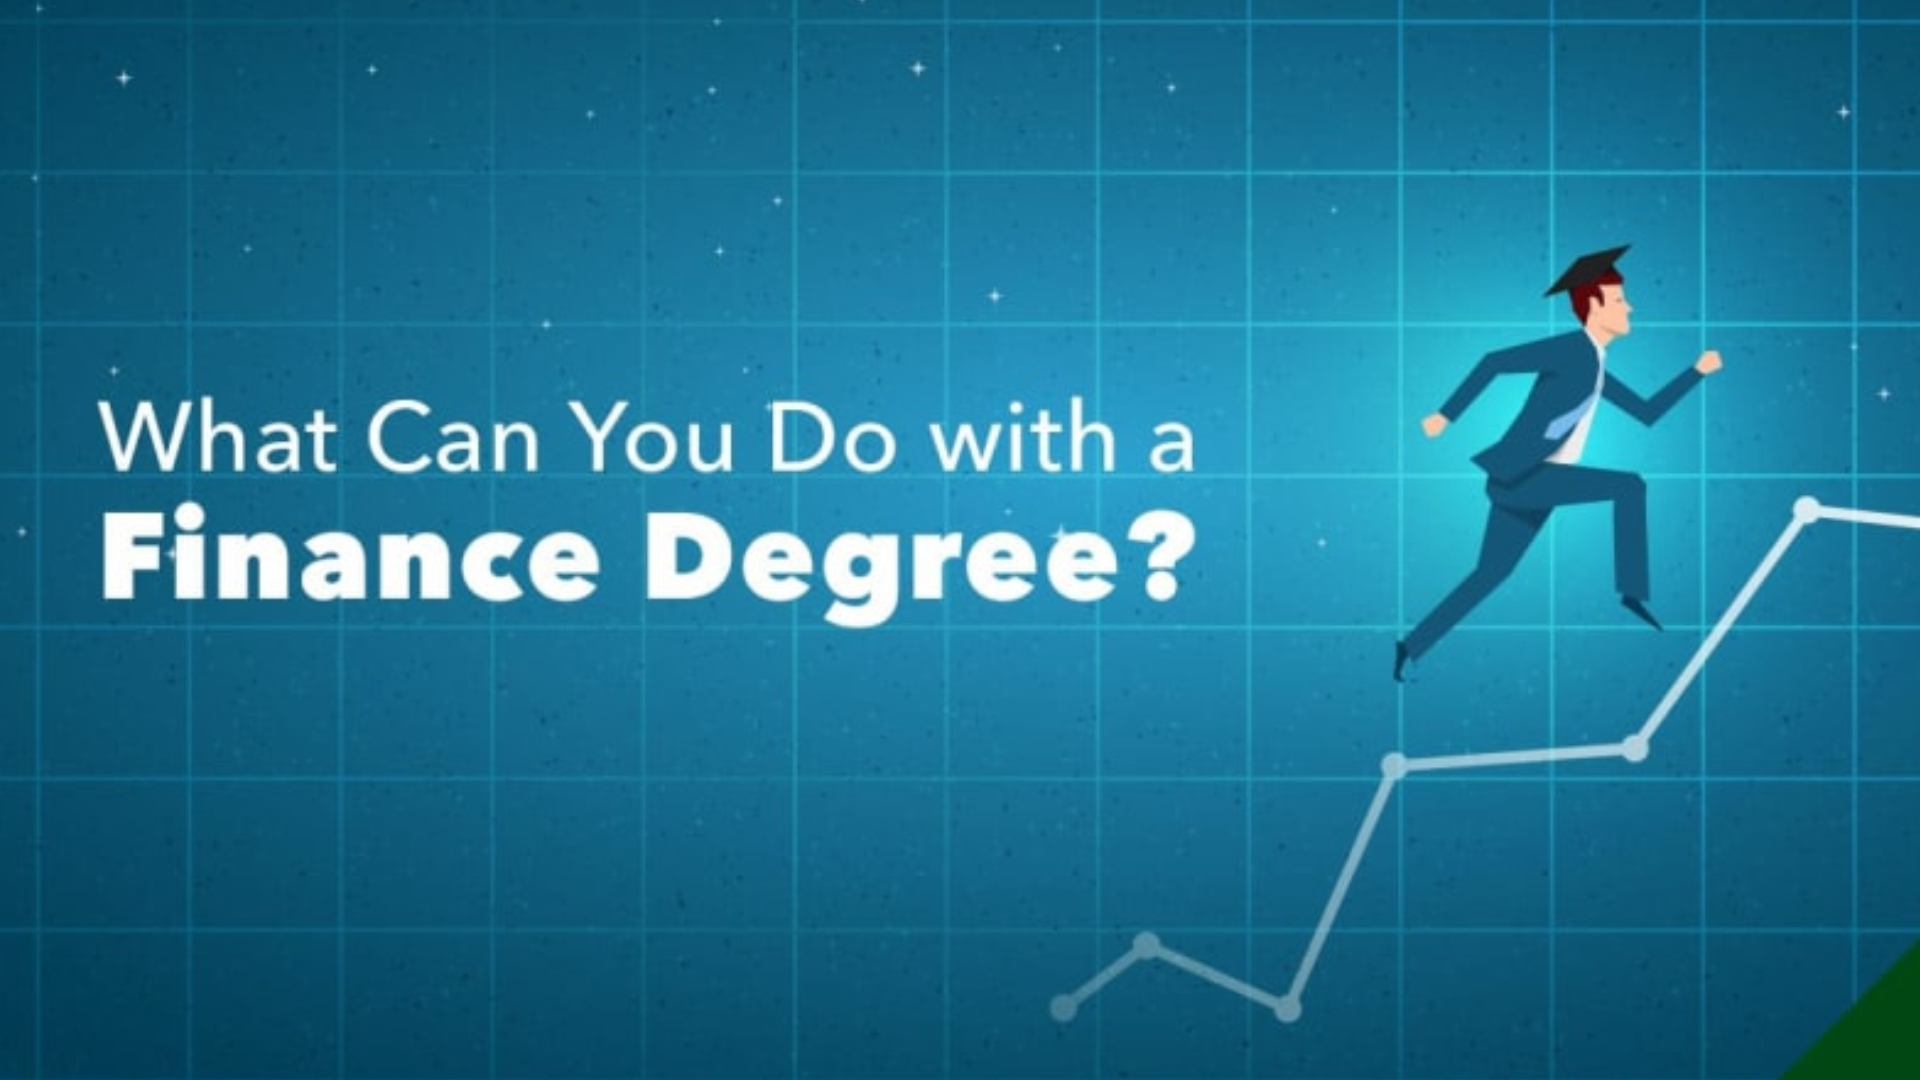 What Can You Do with a Finance Degree?